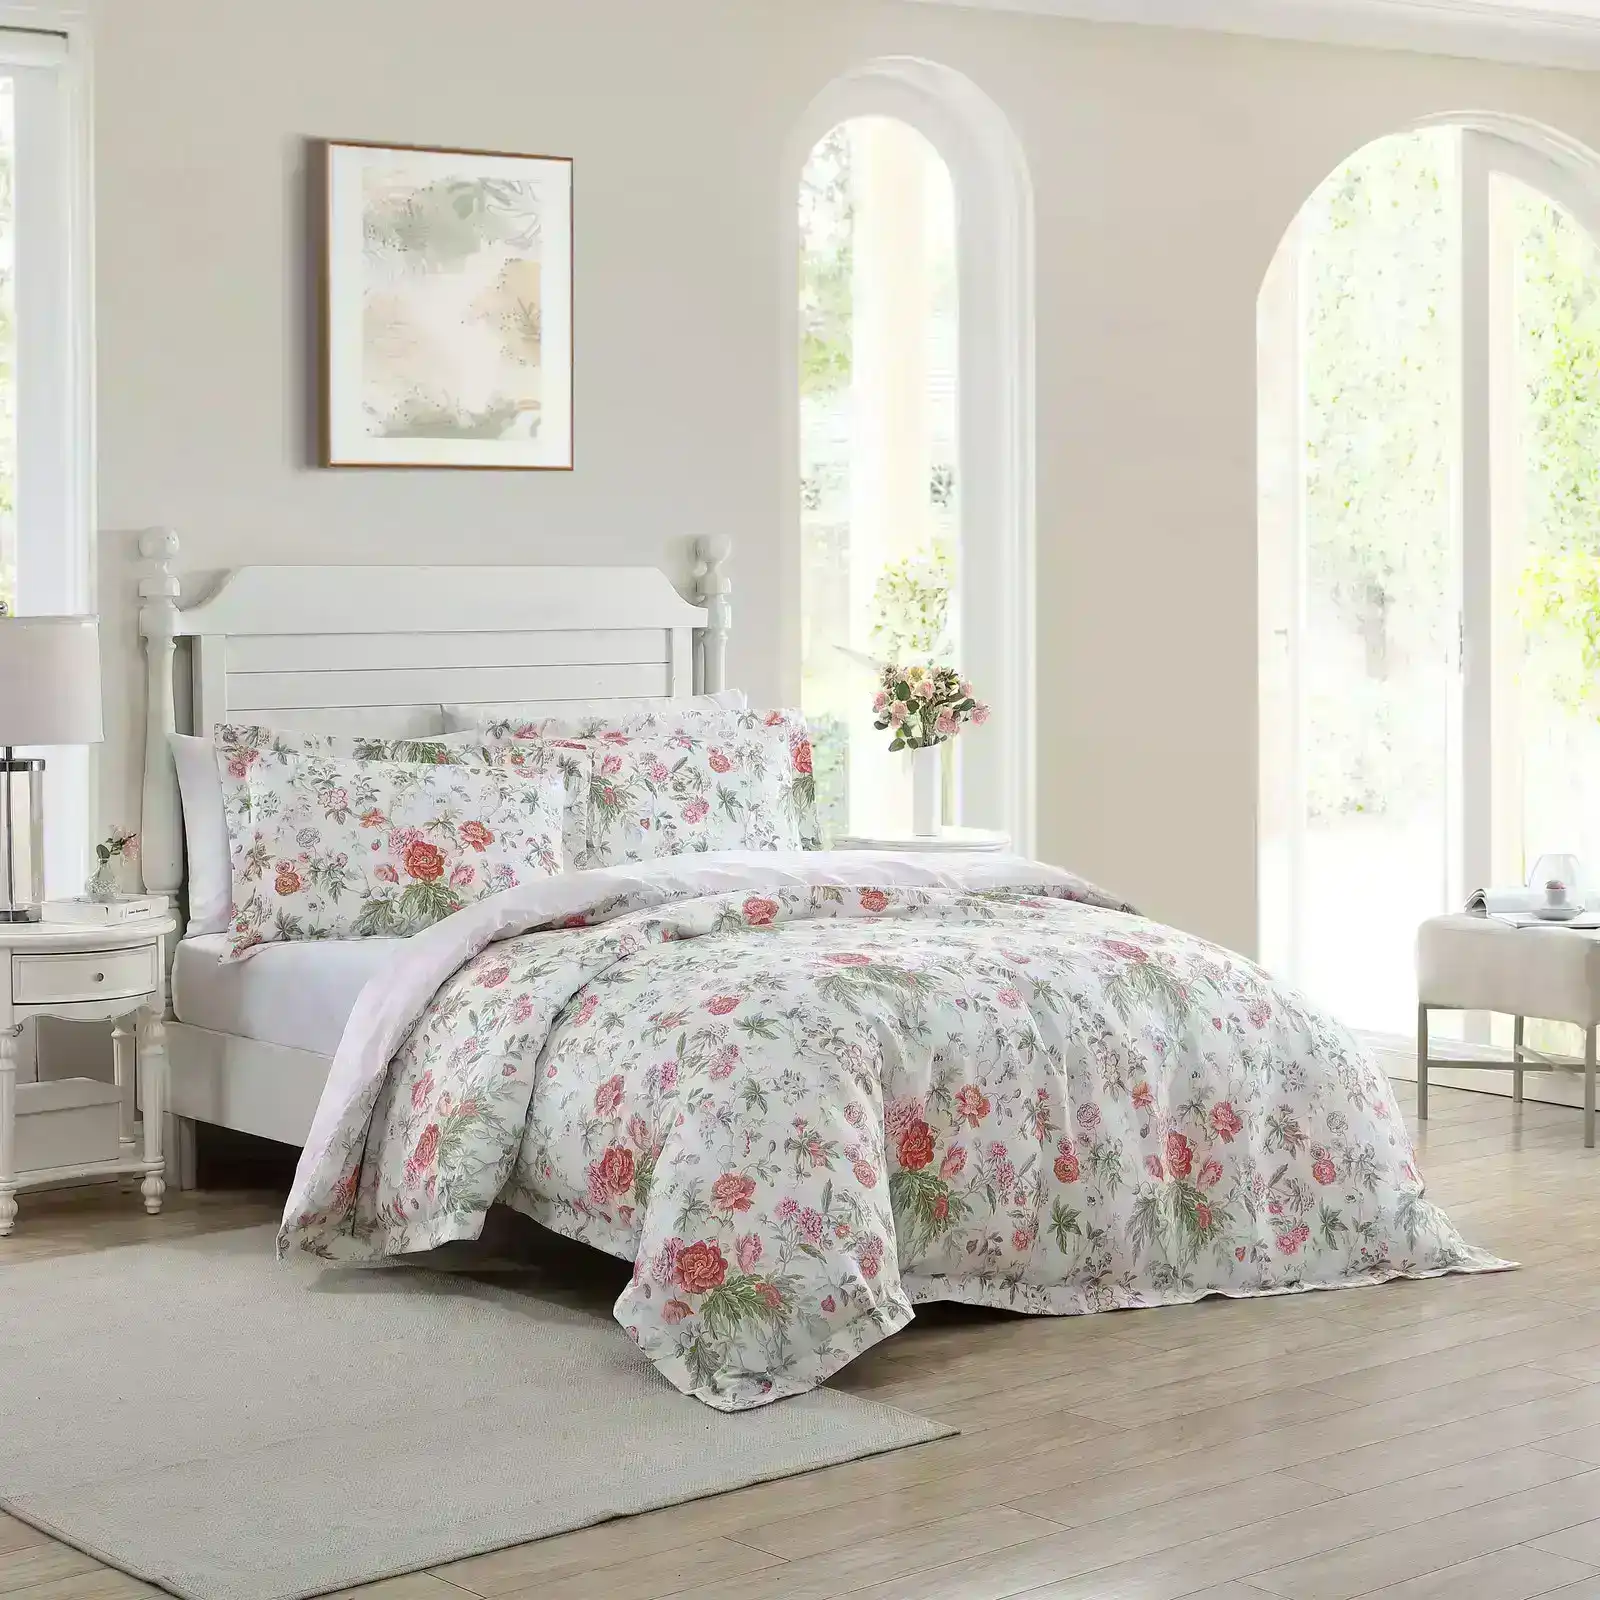 Laura Ashley Double Bed Breezy Floral Quilt Cover w/ 2x Pillowcases Set Coral